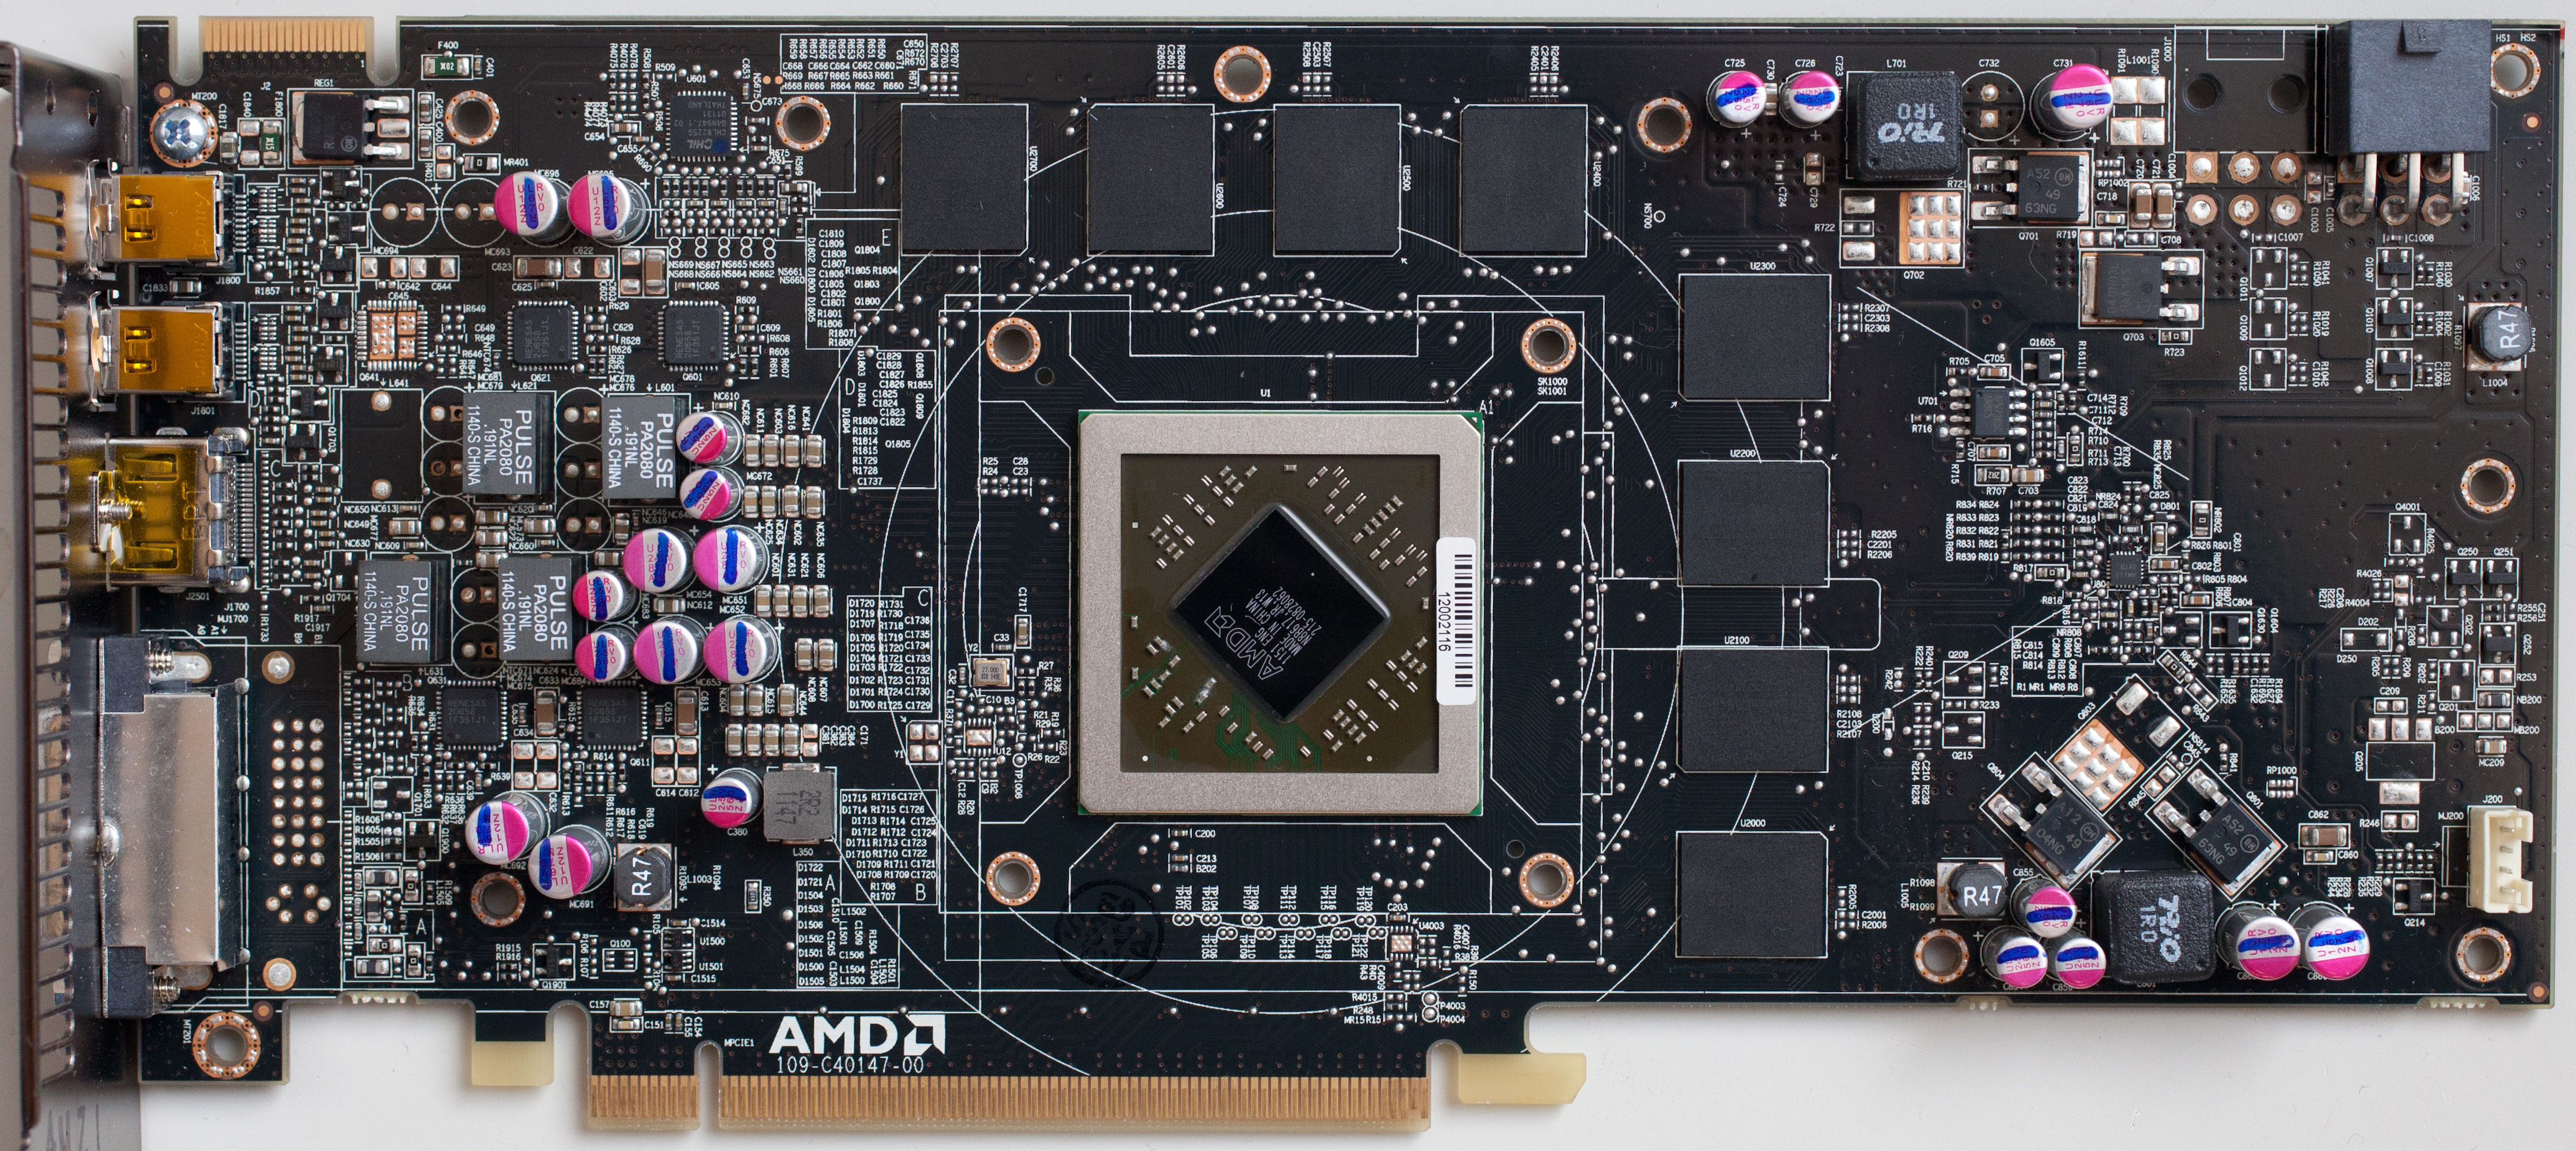 HIS AMD HD7870 IceQ 2GB - Review - Graphics Cards | XSReviews